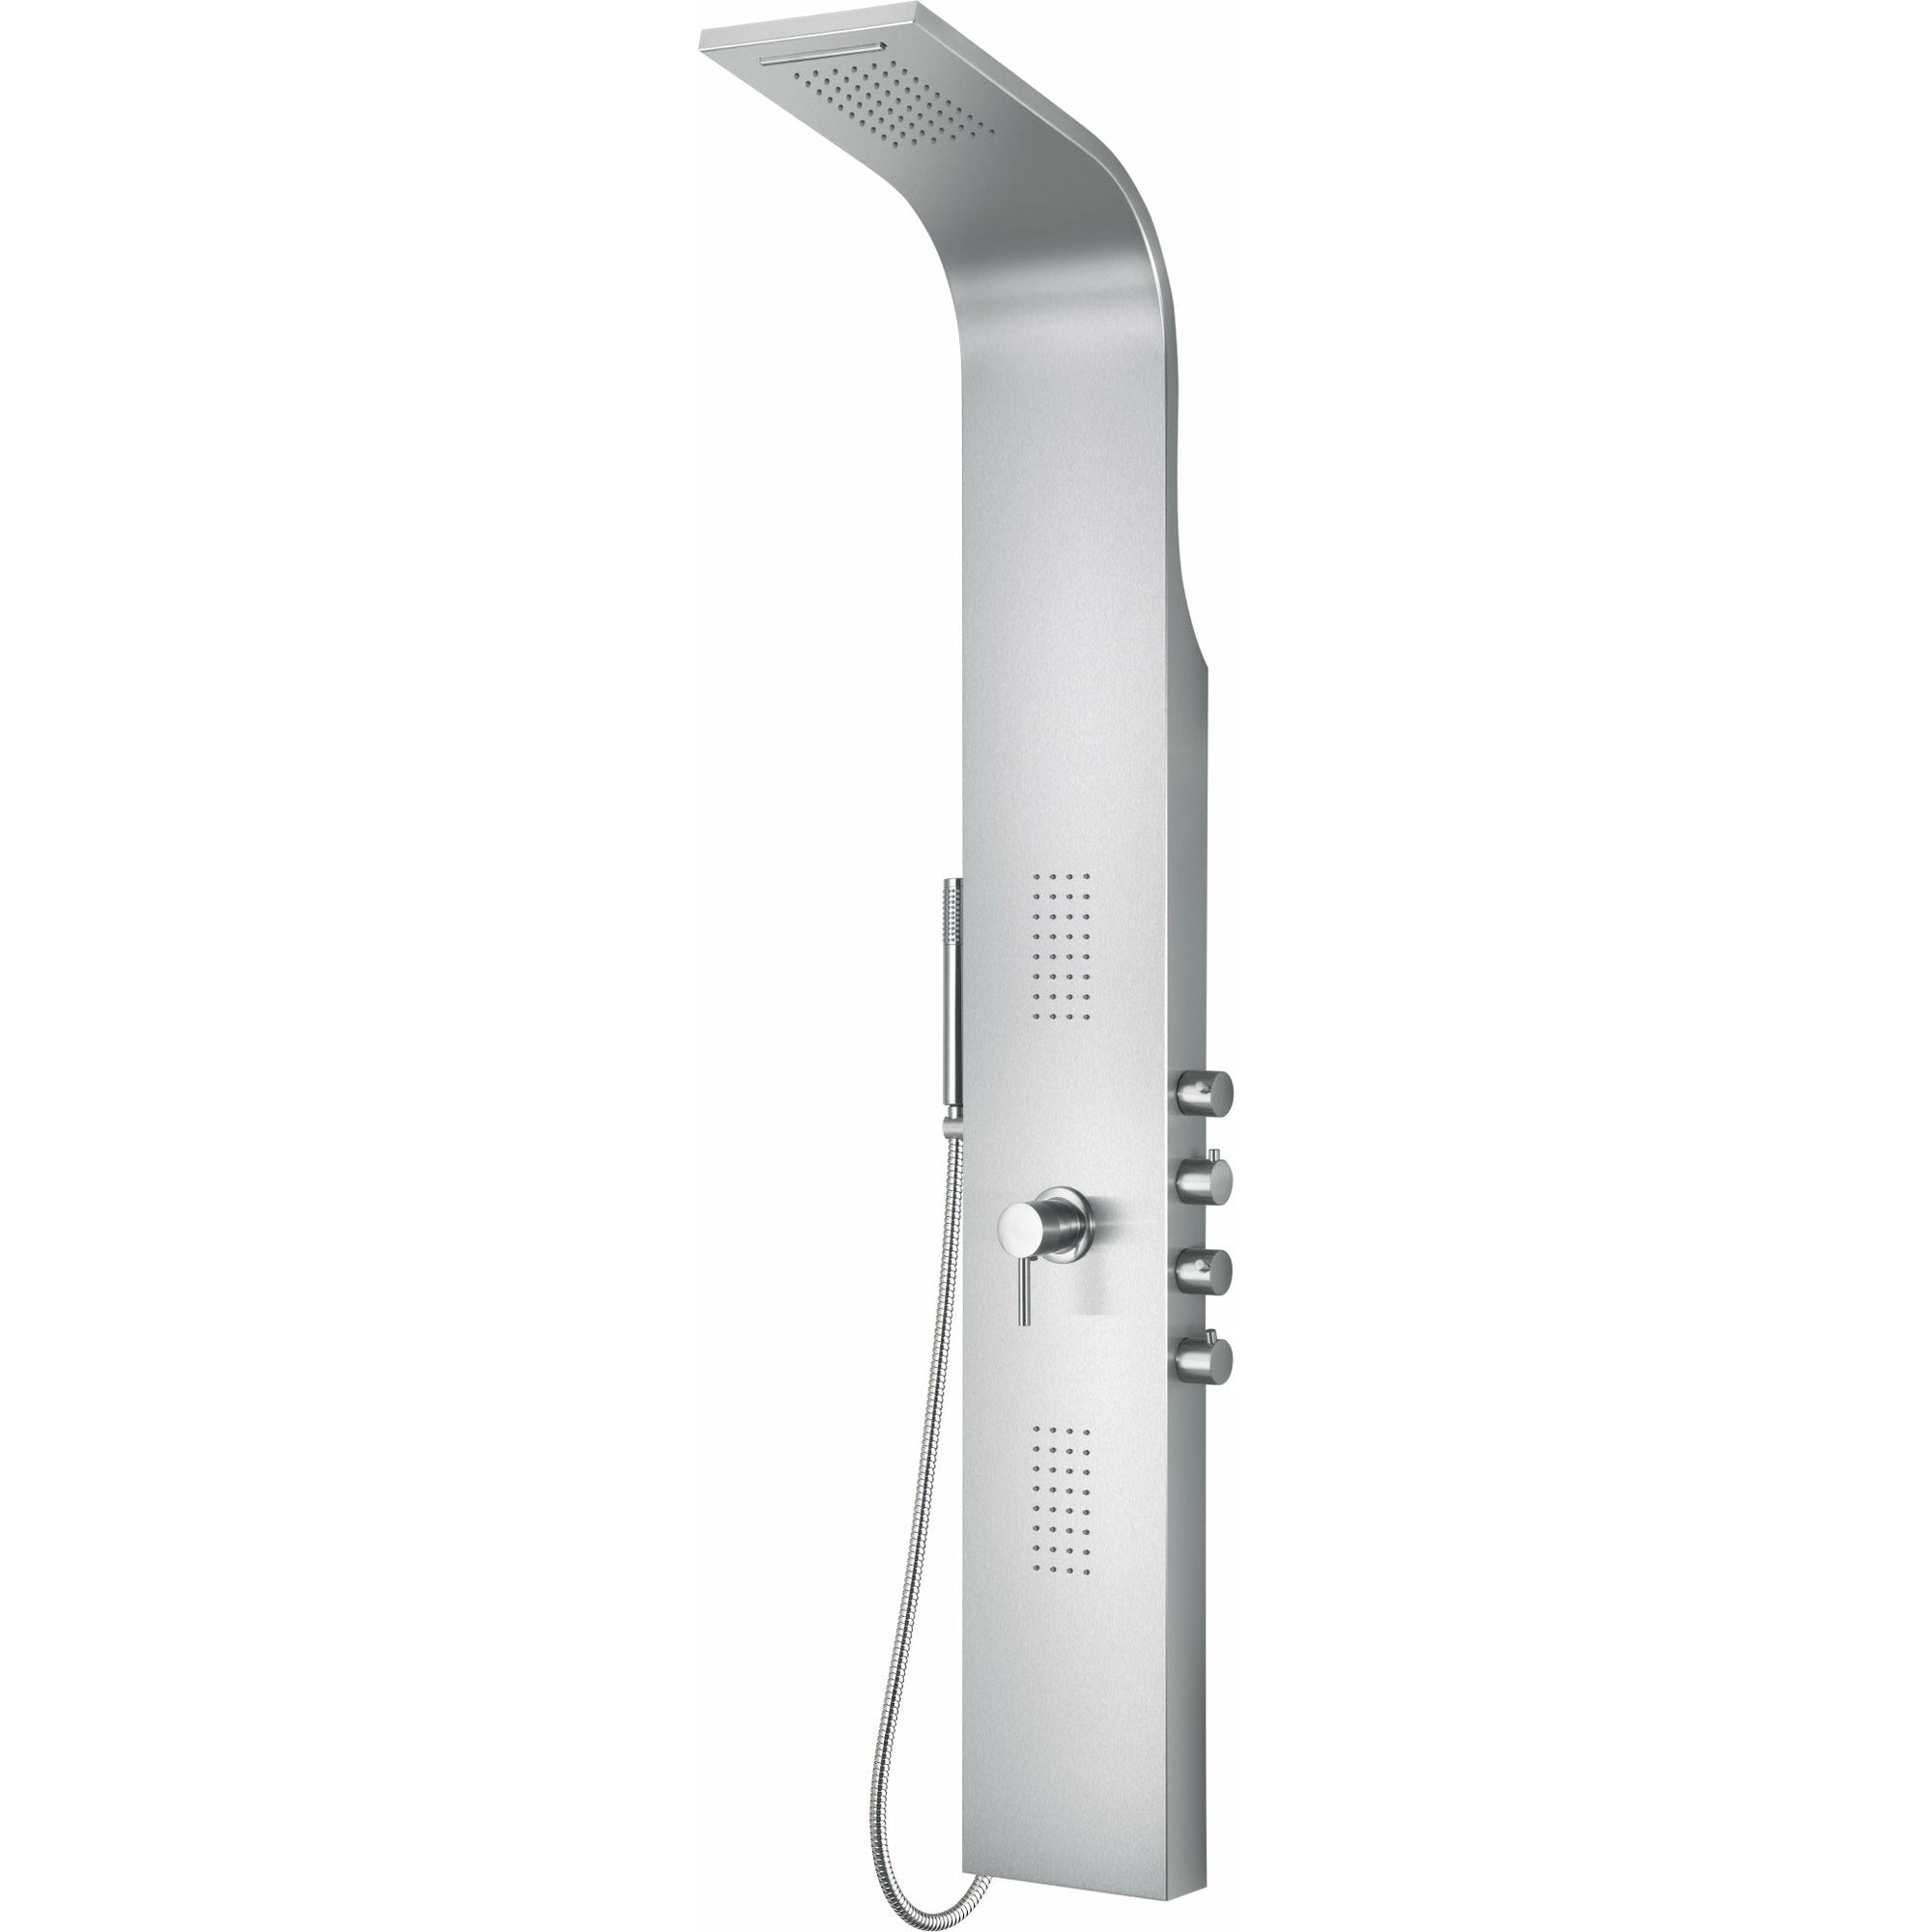 ALFI ABSP30 Stainless Steel Shower Panel with 2 Body Sprays, Overhead rain shower, Handheld sprayer and shower mixer valve - Sleek Stainless Steel panel with Polished Chrome handles & knobs in a white background